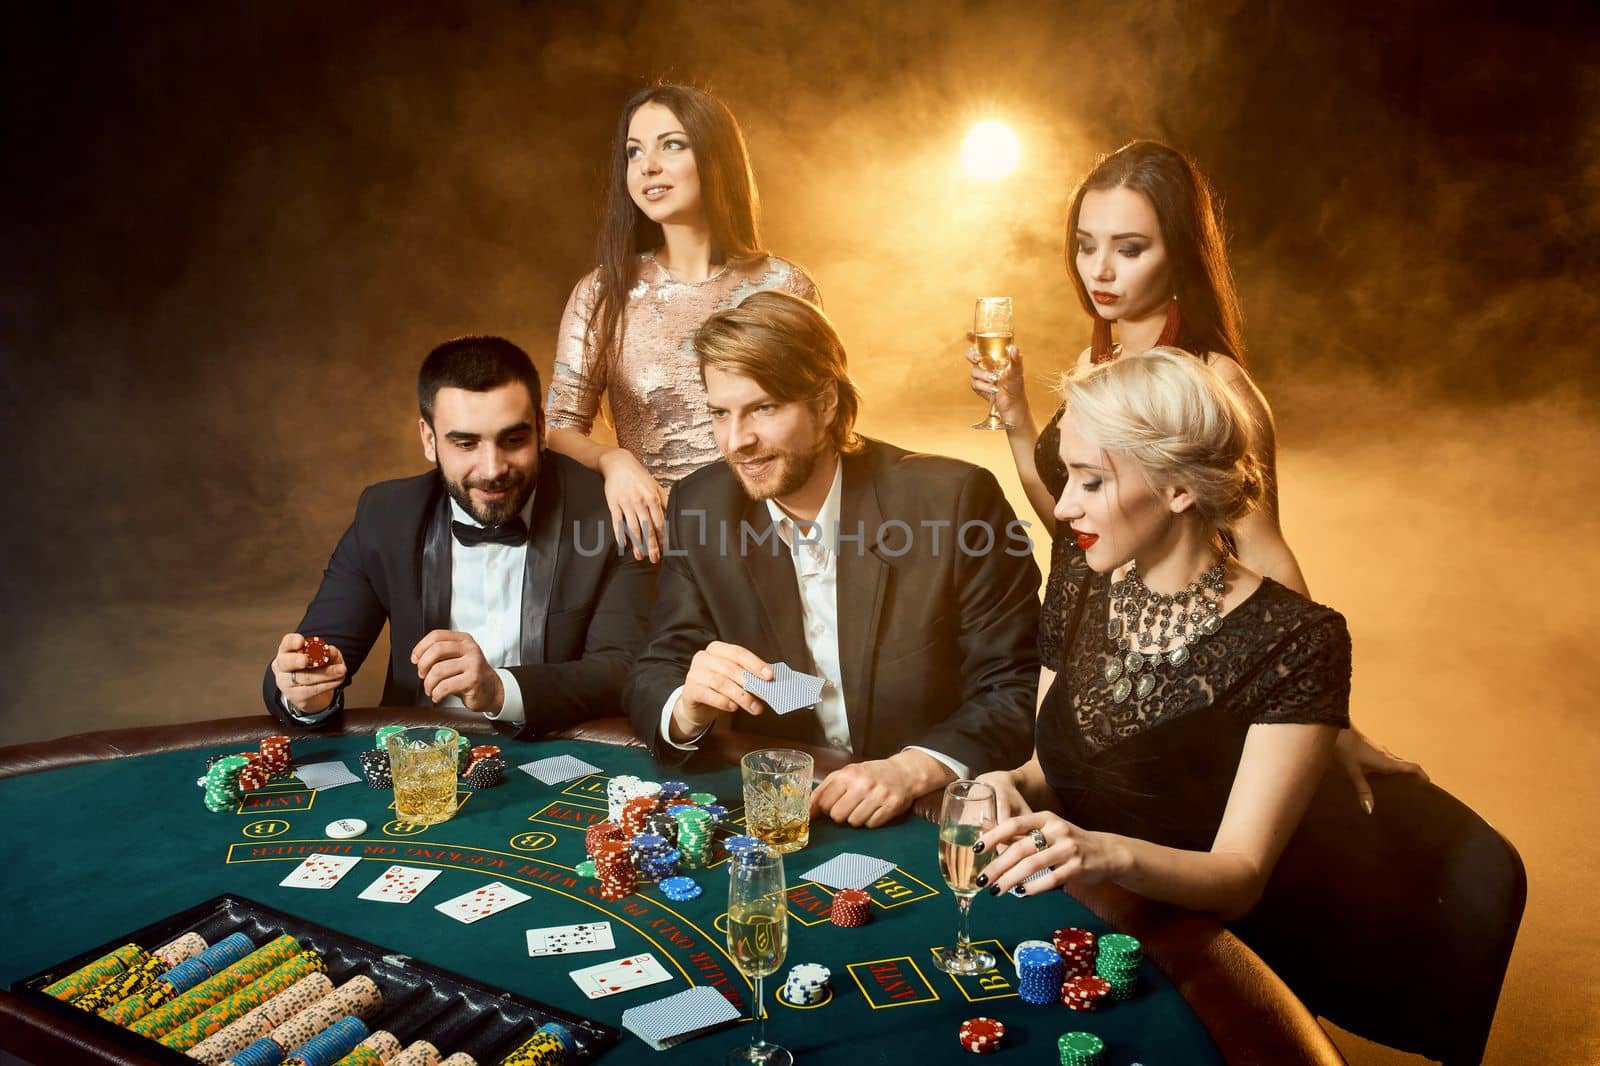 Poker players sitting around a table at a casino. by nazarovsergey